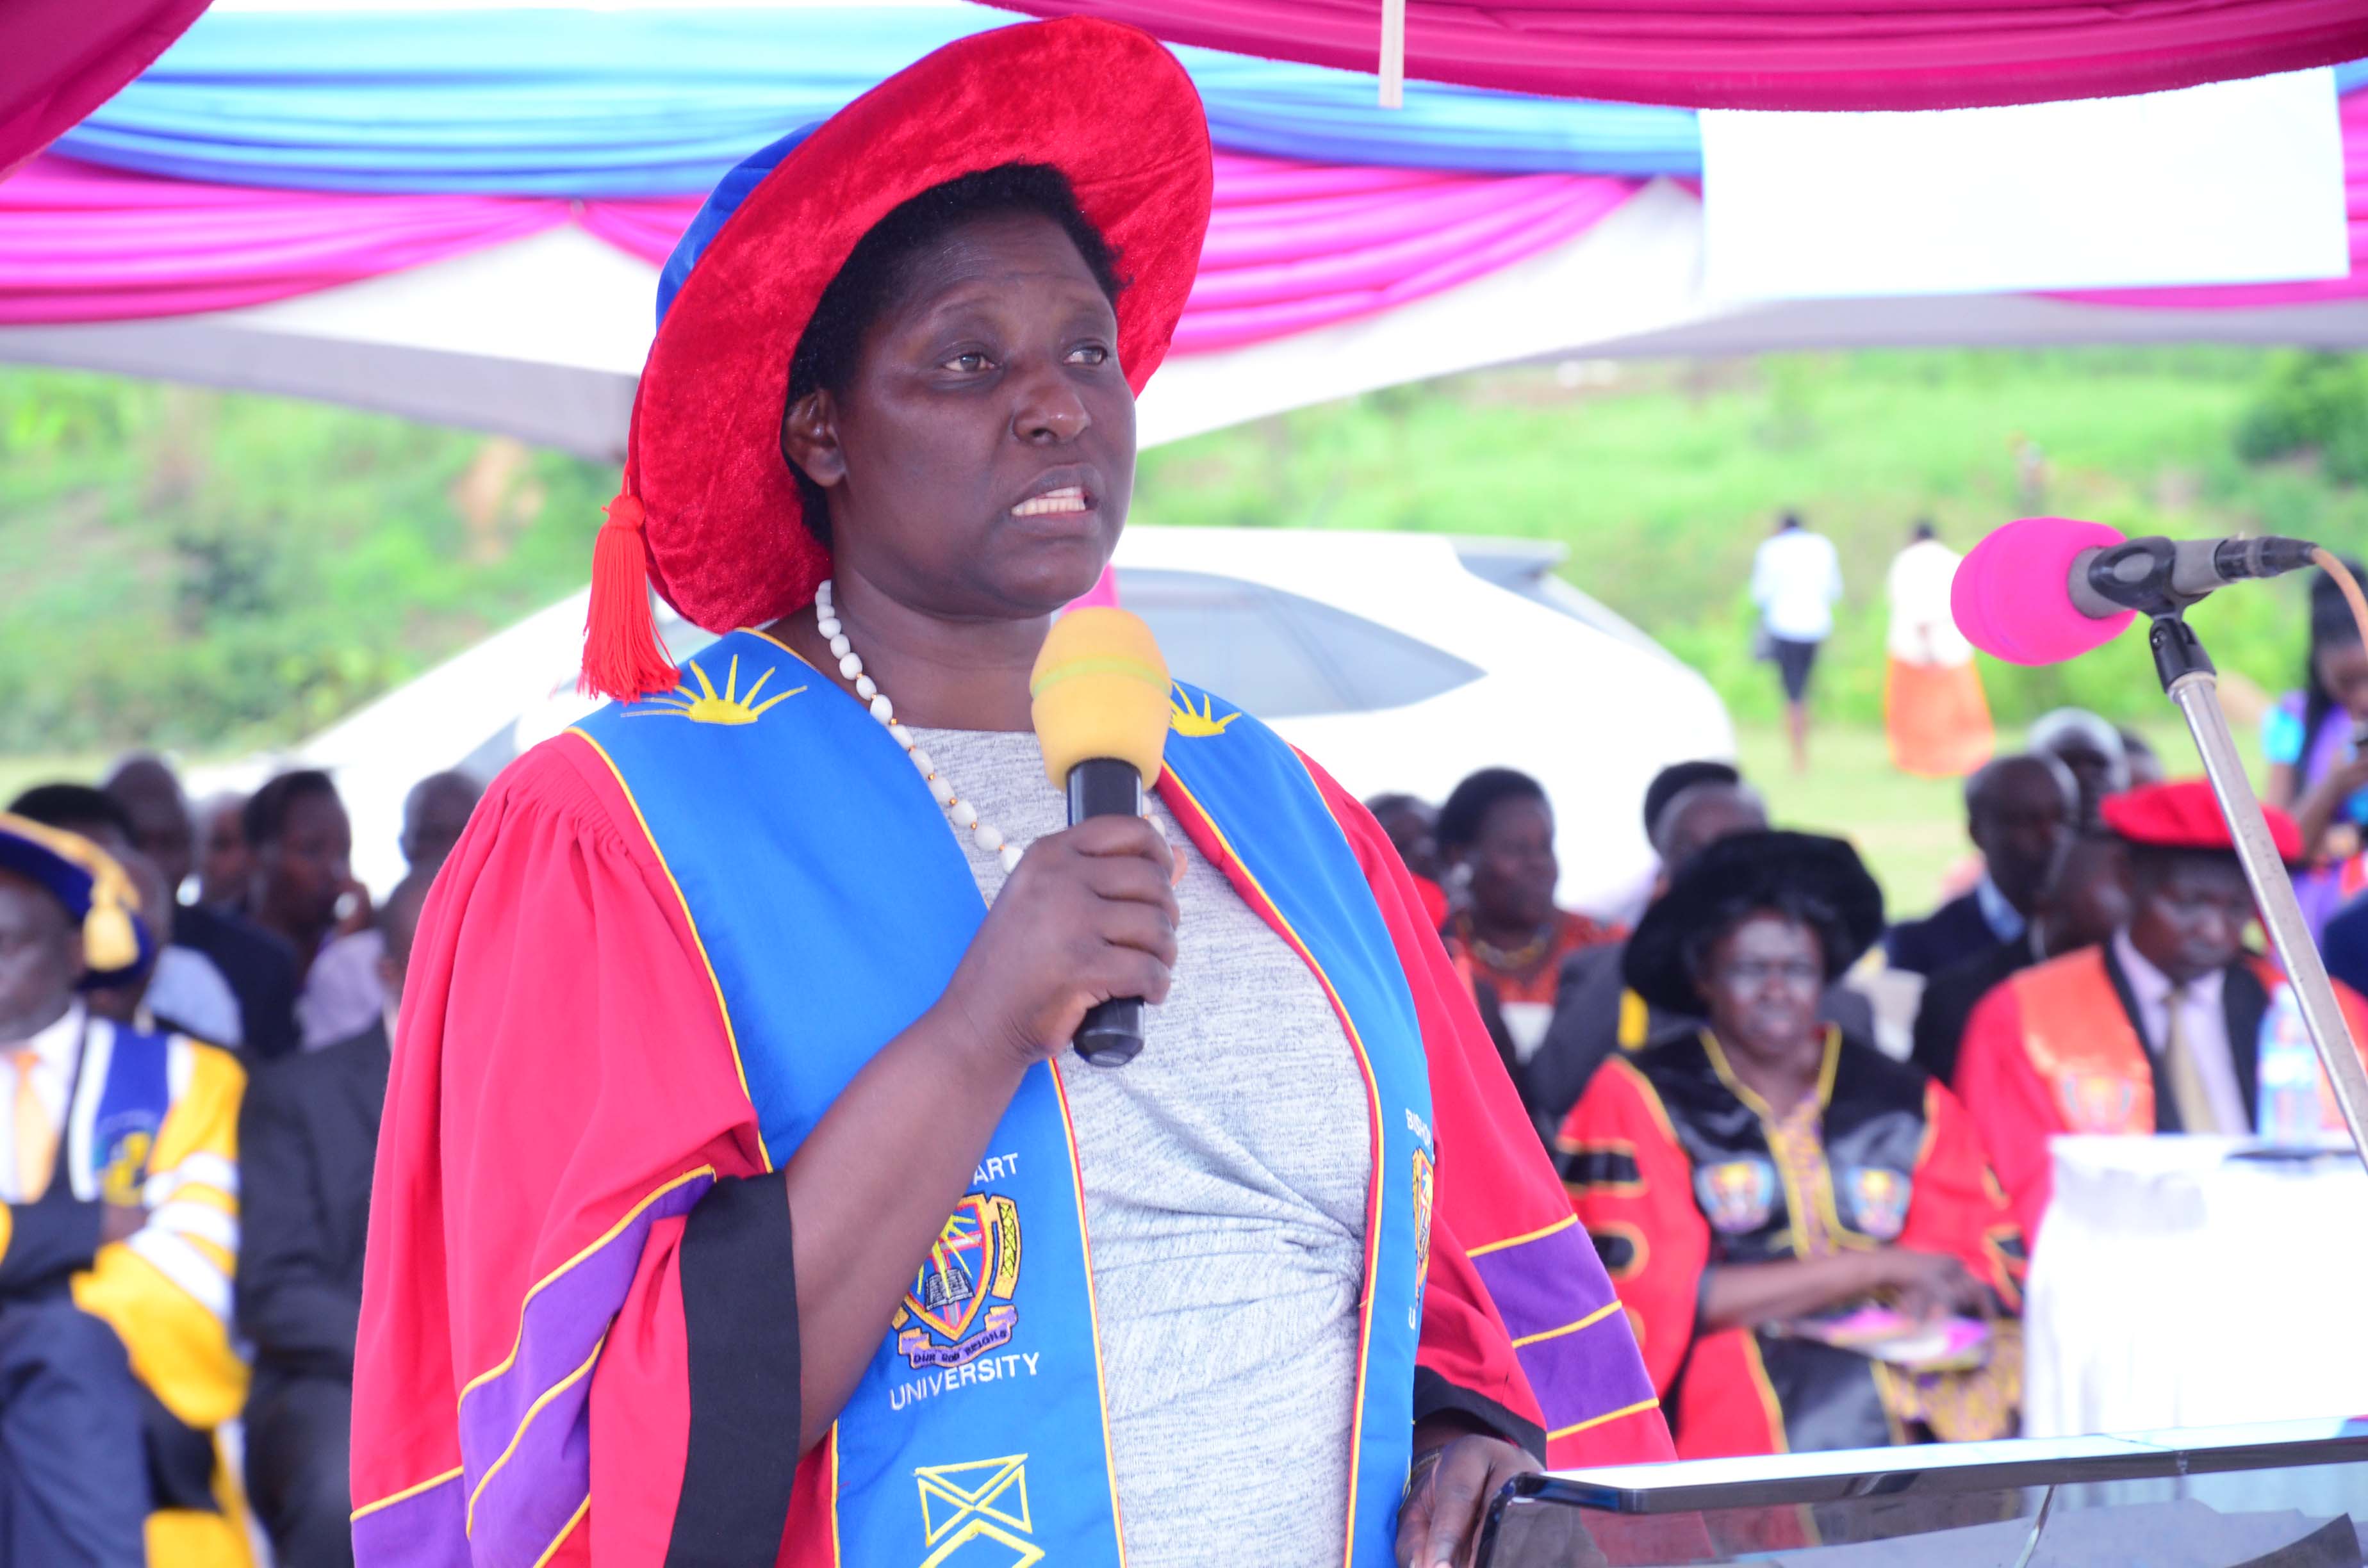 Prof. Maud Kamatenesi (PhD) Vice-Chancellor Bishop Stuart University delivering her speech at BSU's 15th Graduation Ceremony held on 18th of October 2019